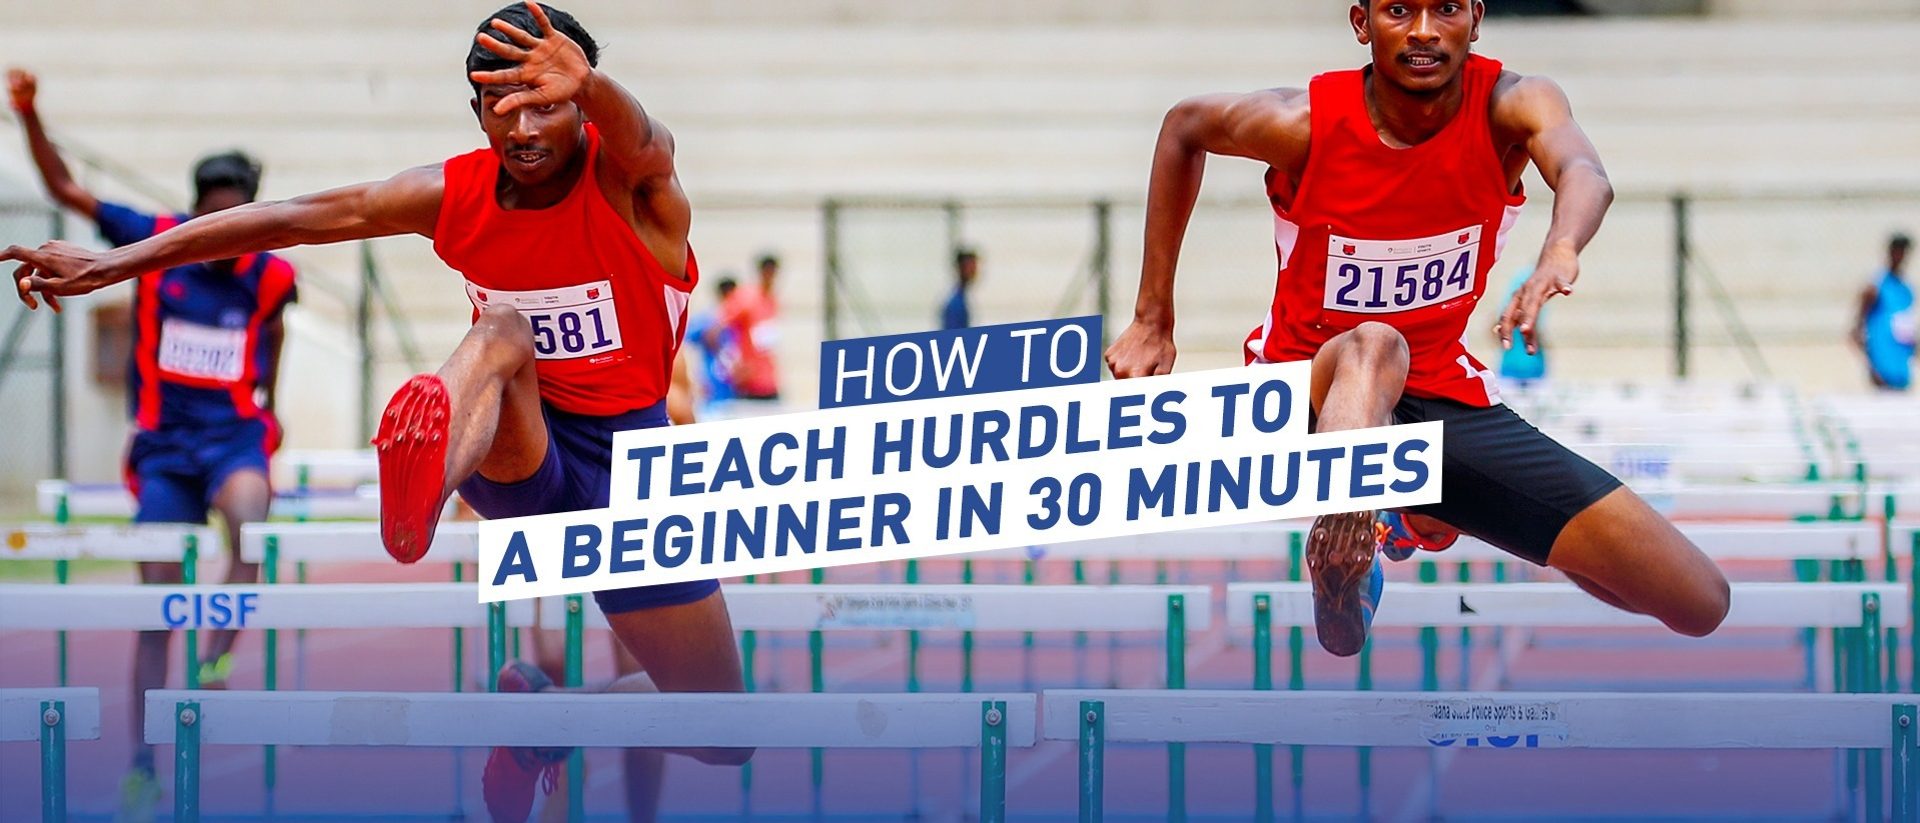 Teaching Hurdles to a Beginner in 30 Minutes